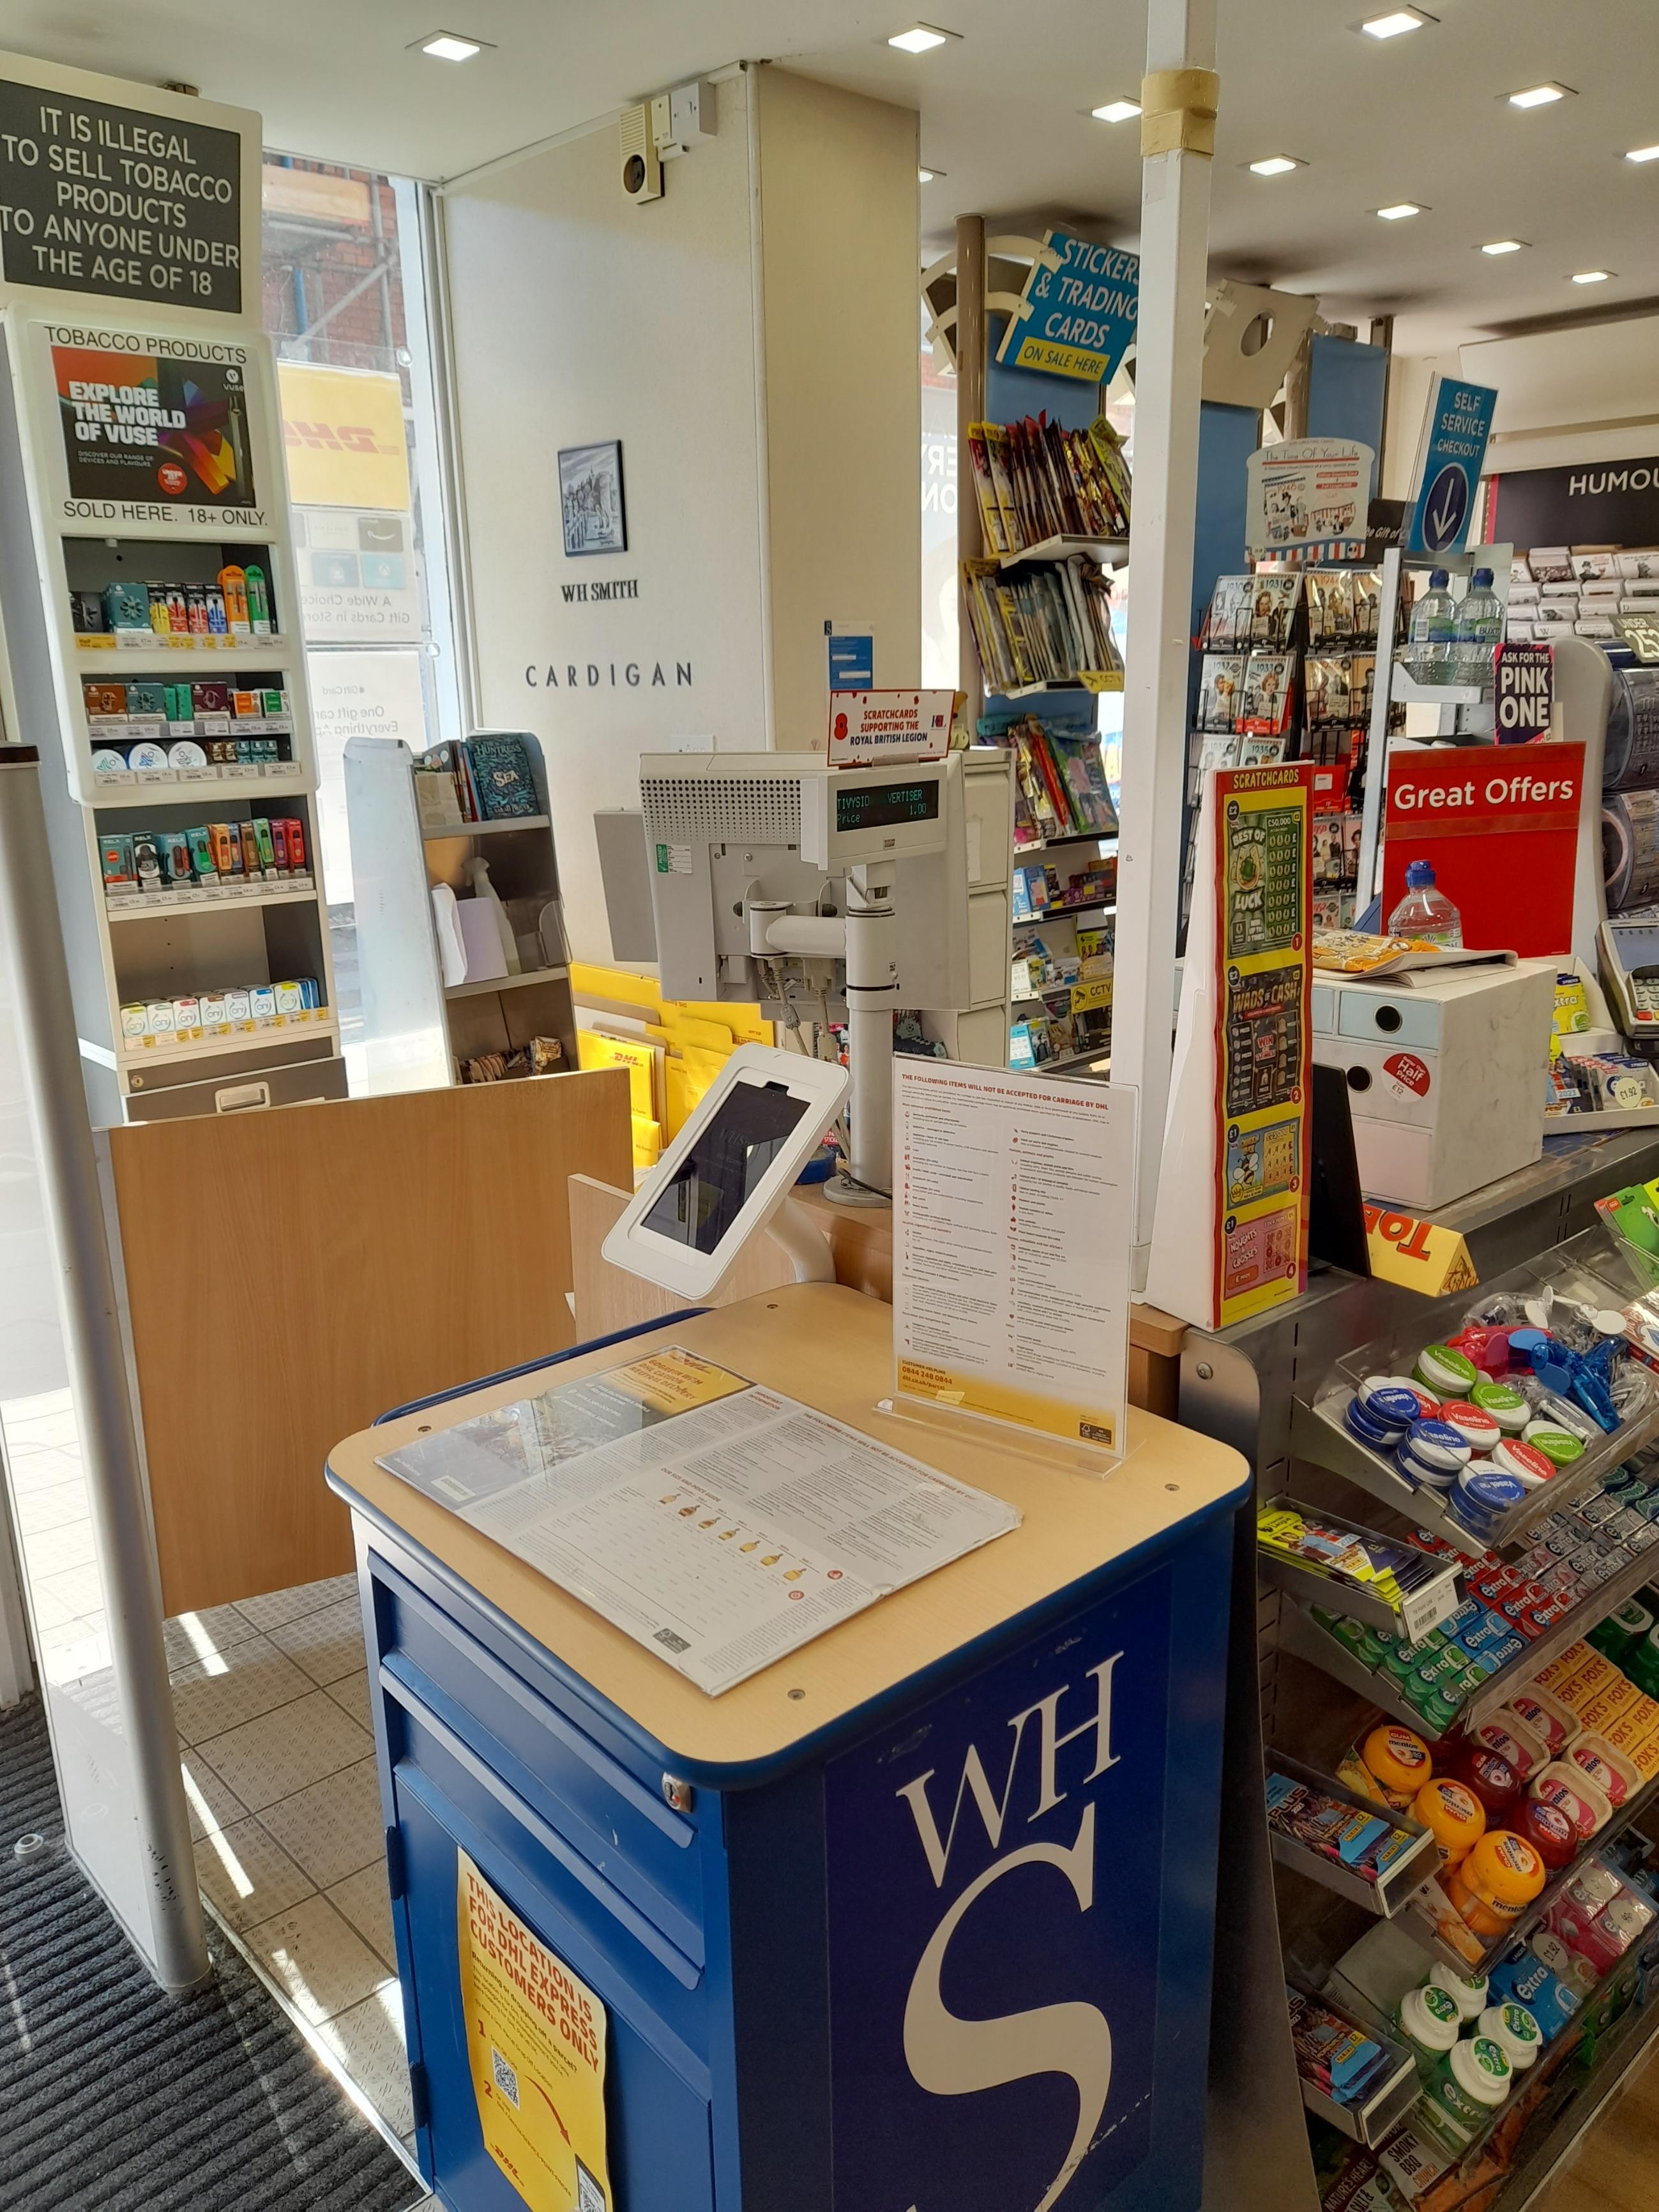 Images DHL Express Service Point (WHSmith Cardigan)